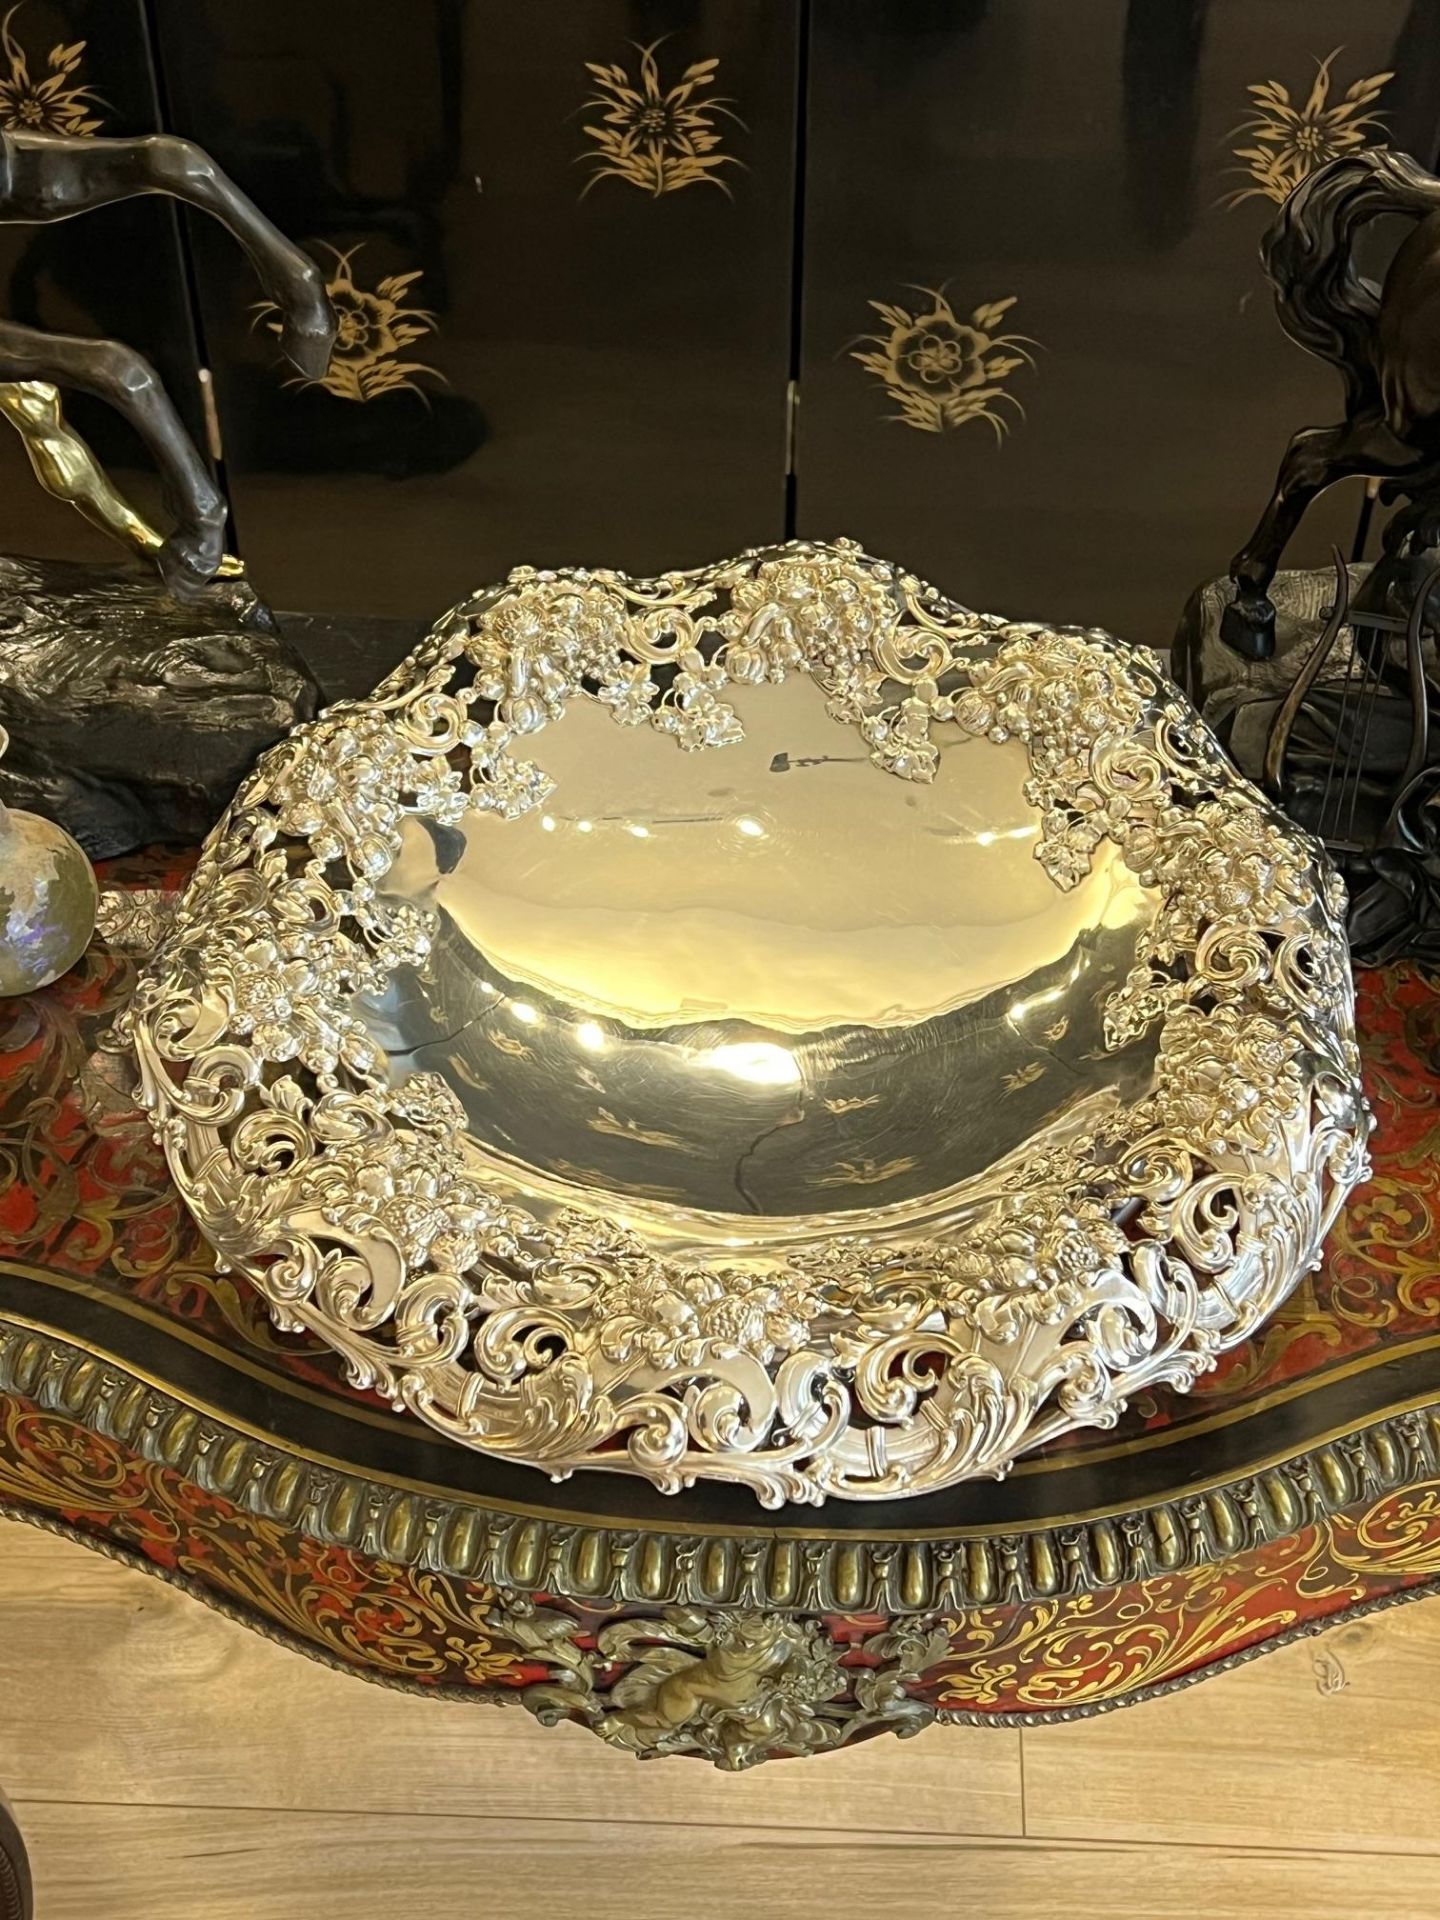 A VERY LARGE STERLING SILVER CENTREPIECE BY GORHAM, C. 1901 AMERICAN - Image 3 of 10